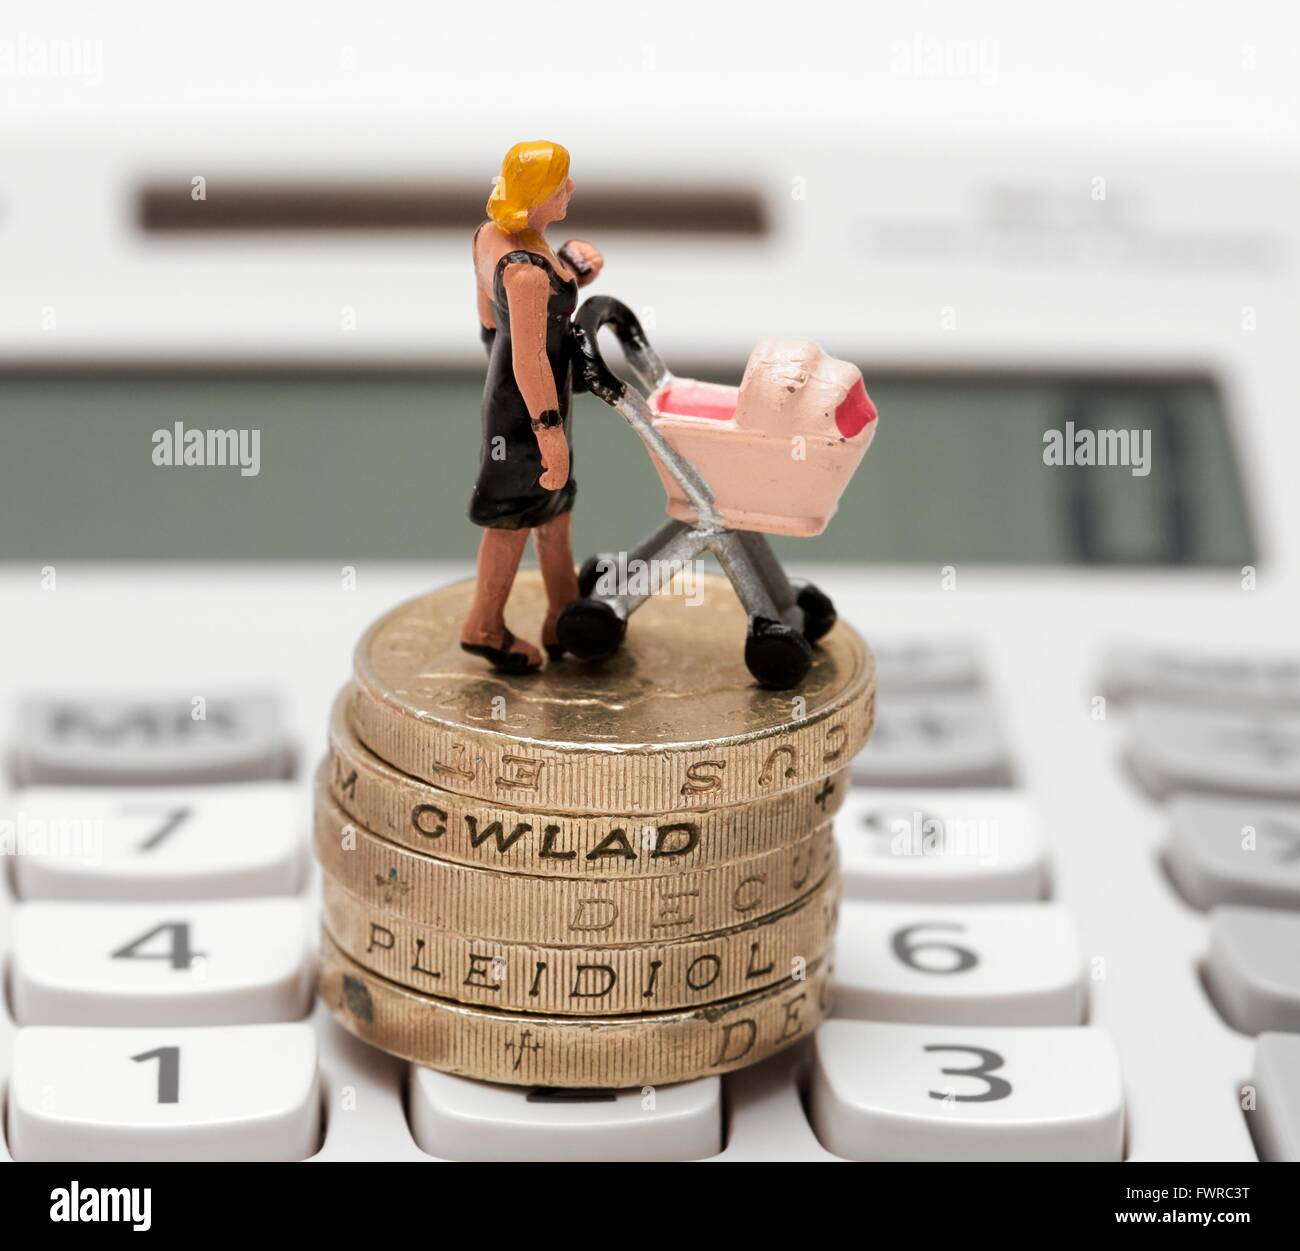 A miniature figurine woman with a pram standing on top of one pound coins and calculator Stock Photo